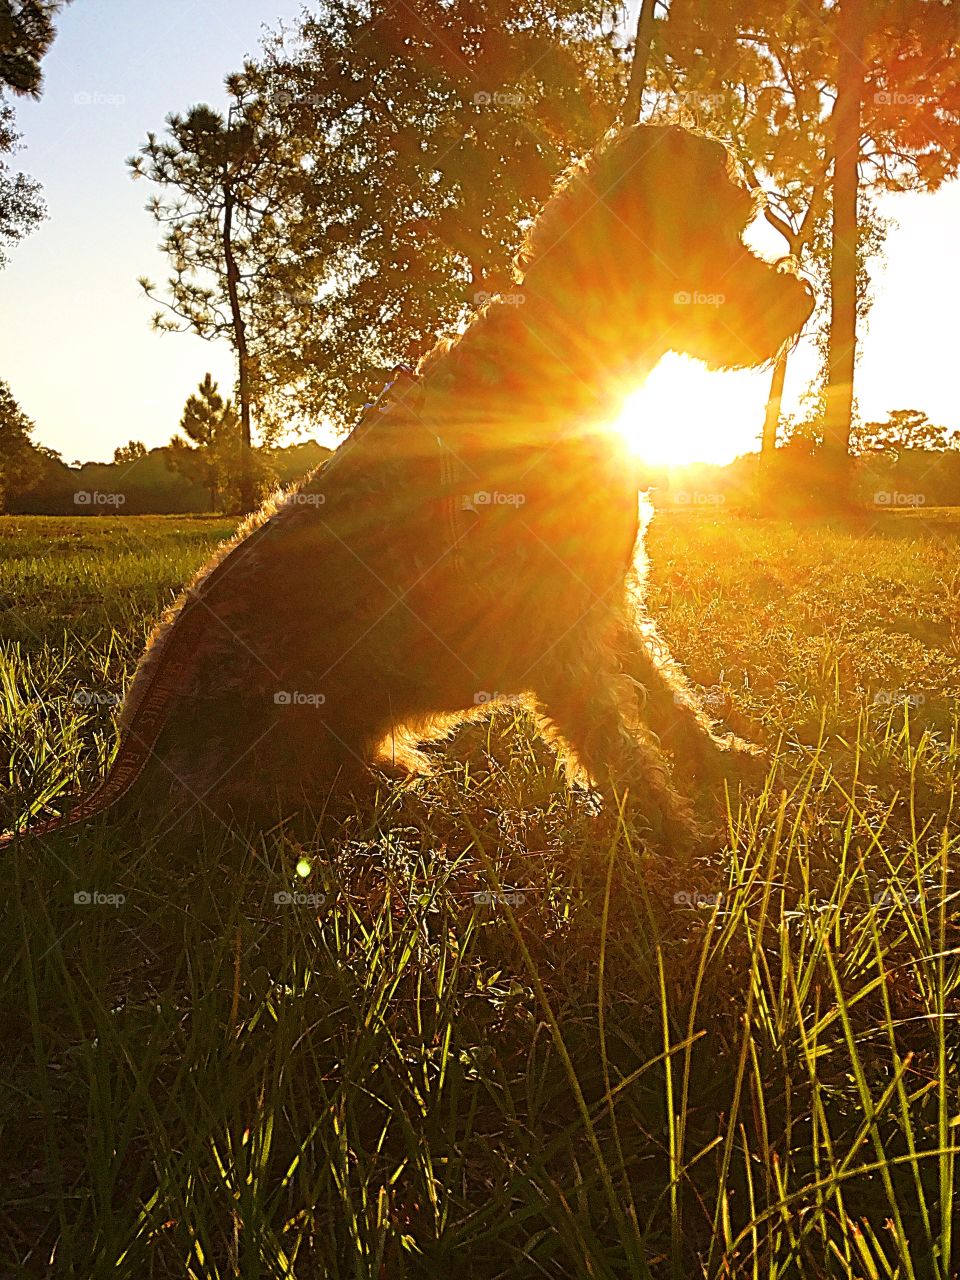 A Schnoodle dog poses  in the field during a spectacular sunset. His fur is highlighted by the sun rays